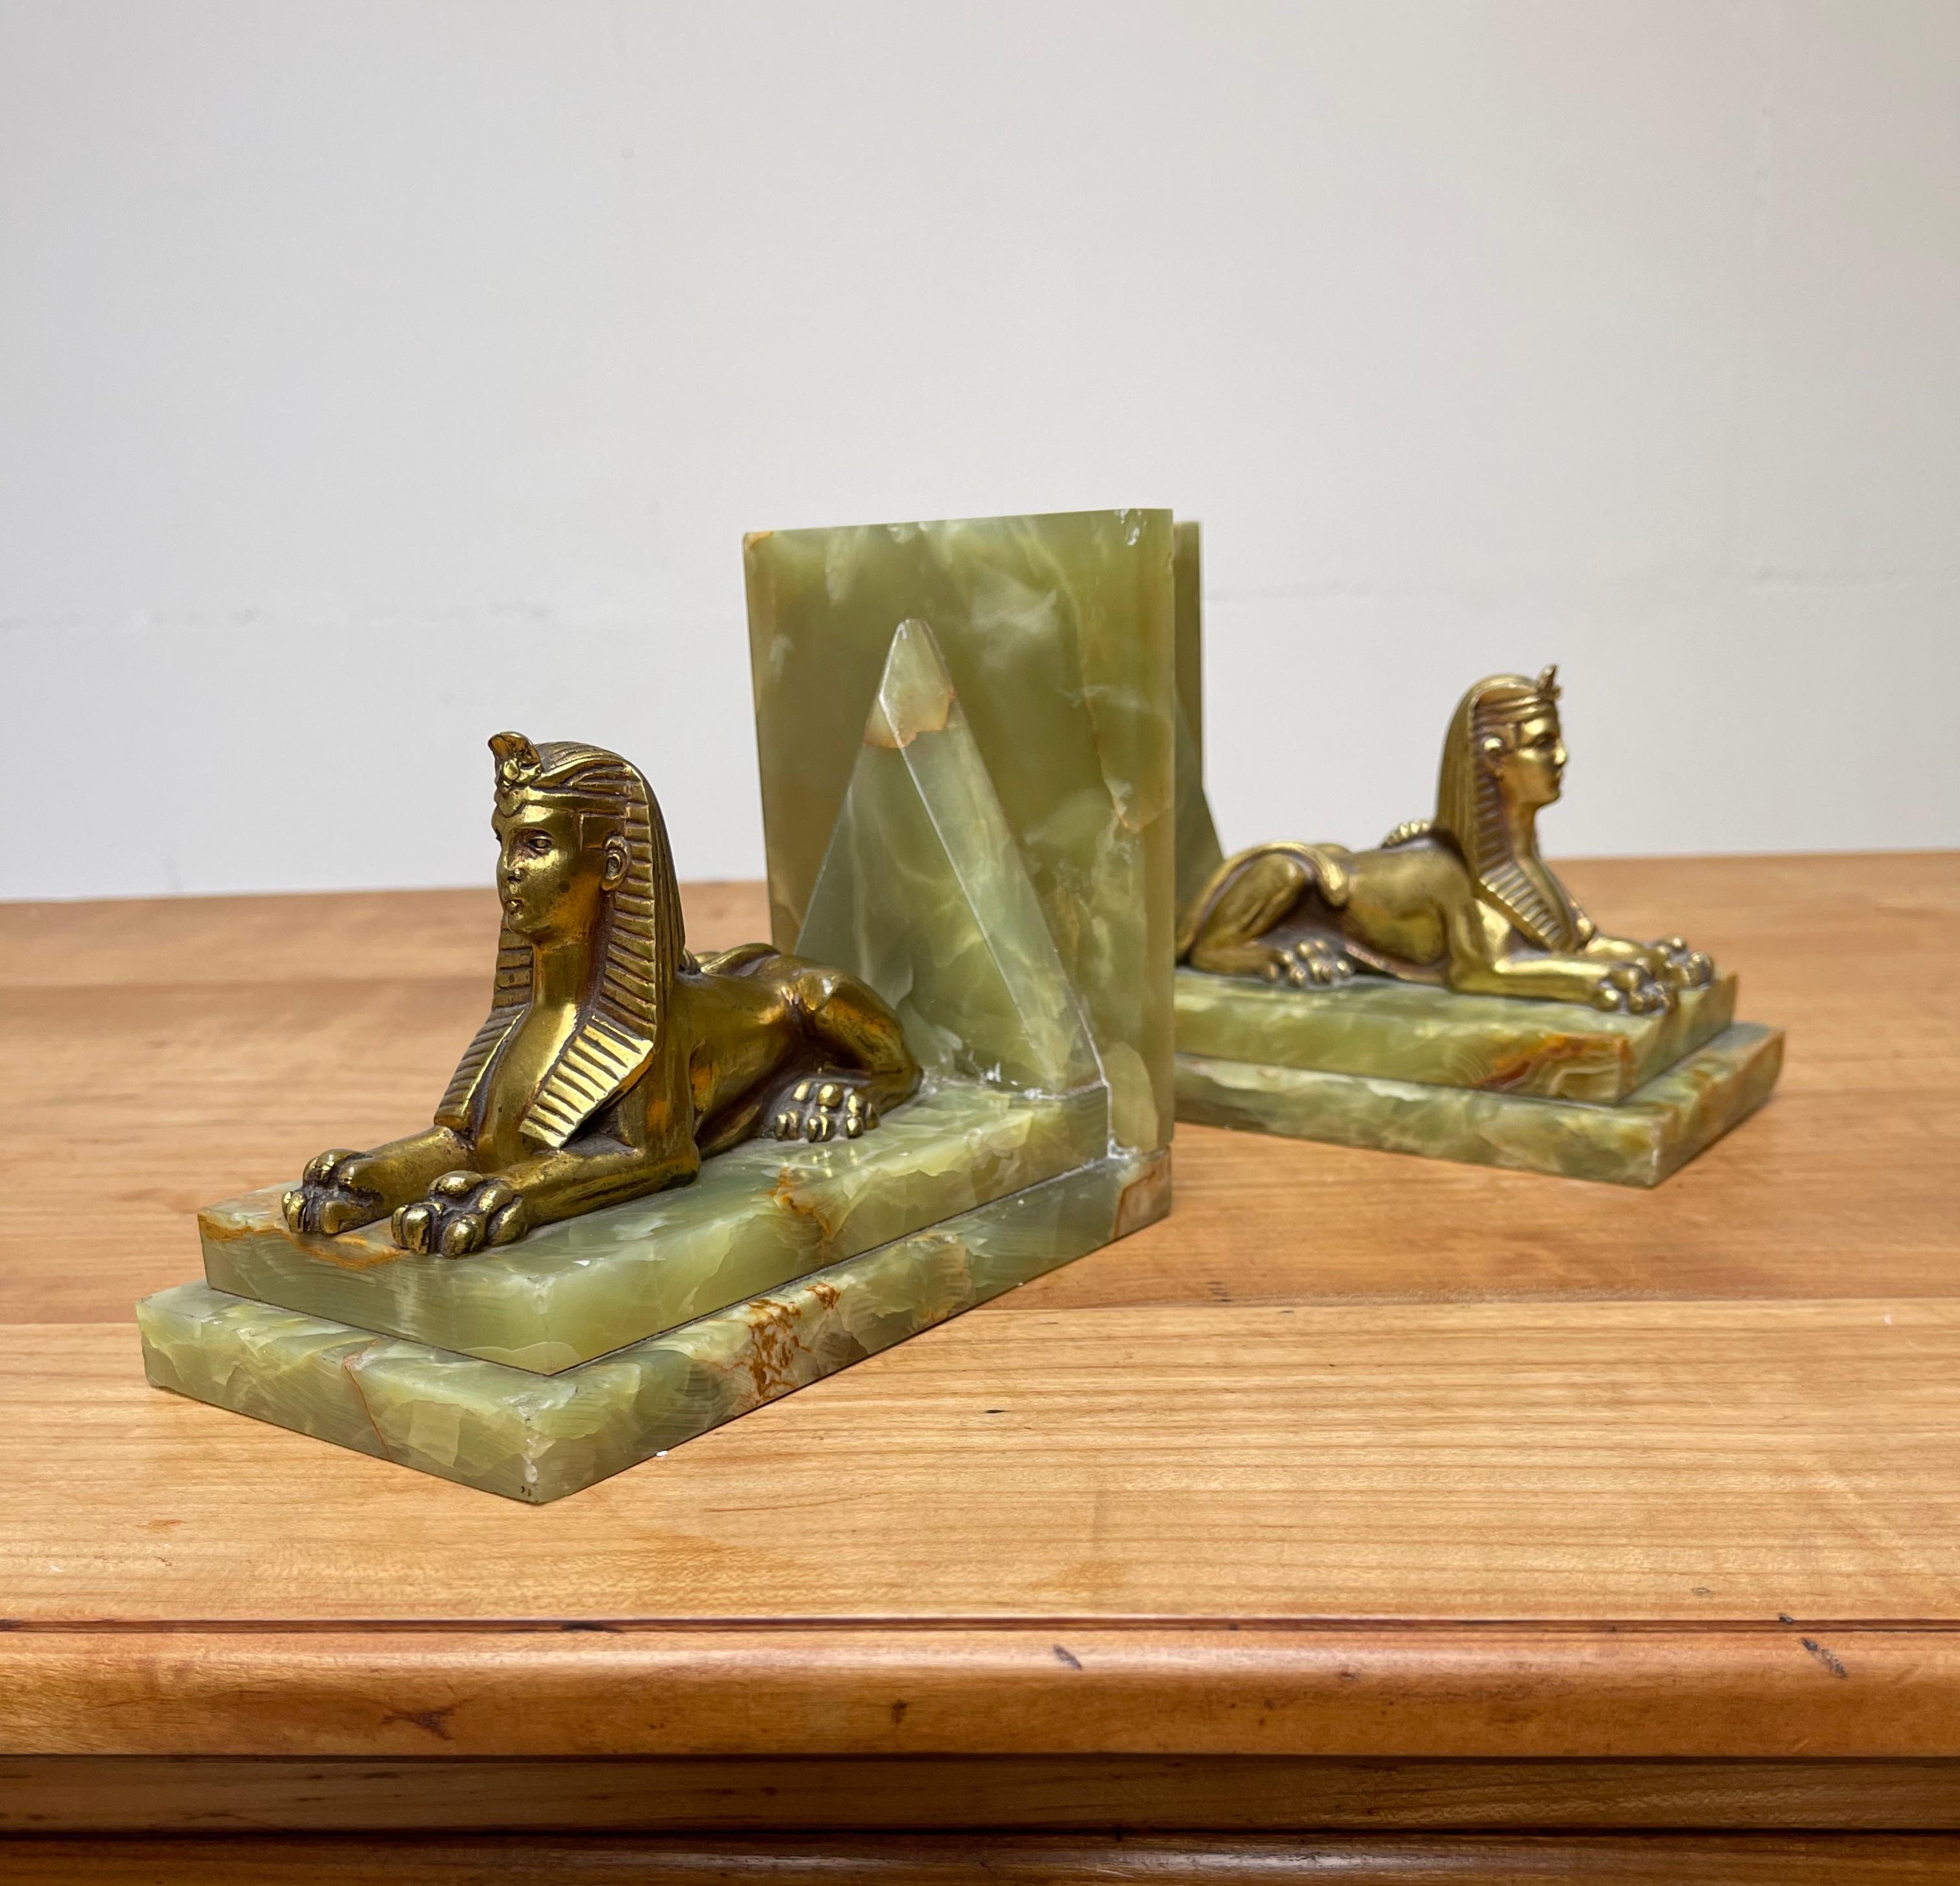 French Rare Antique Pair of Art Deco Bookends Egyptian Revival Bronze Sphinx Sculptures